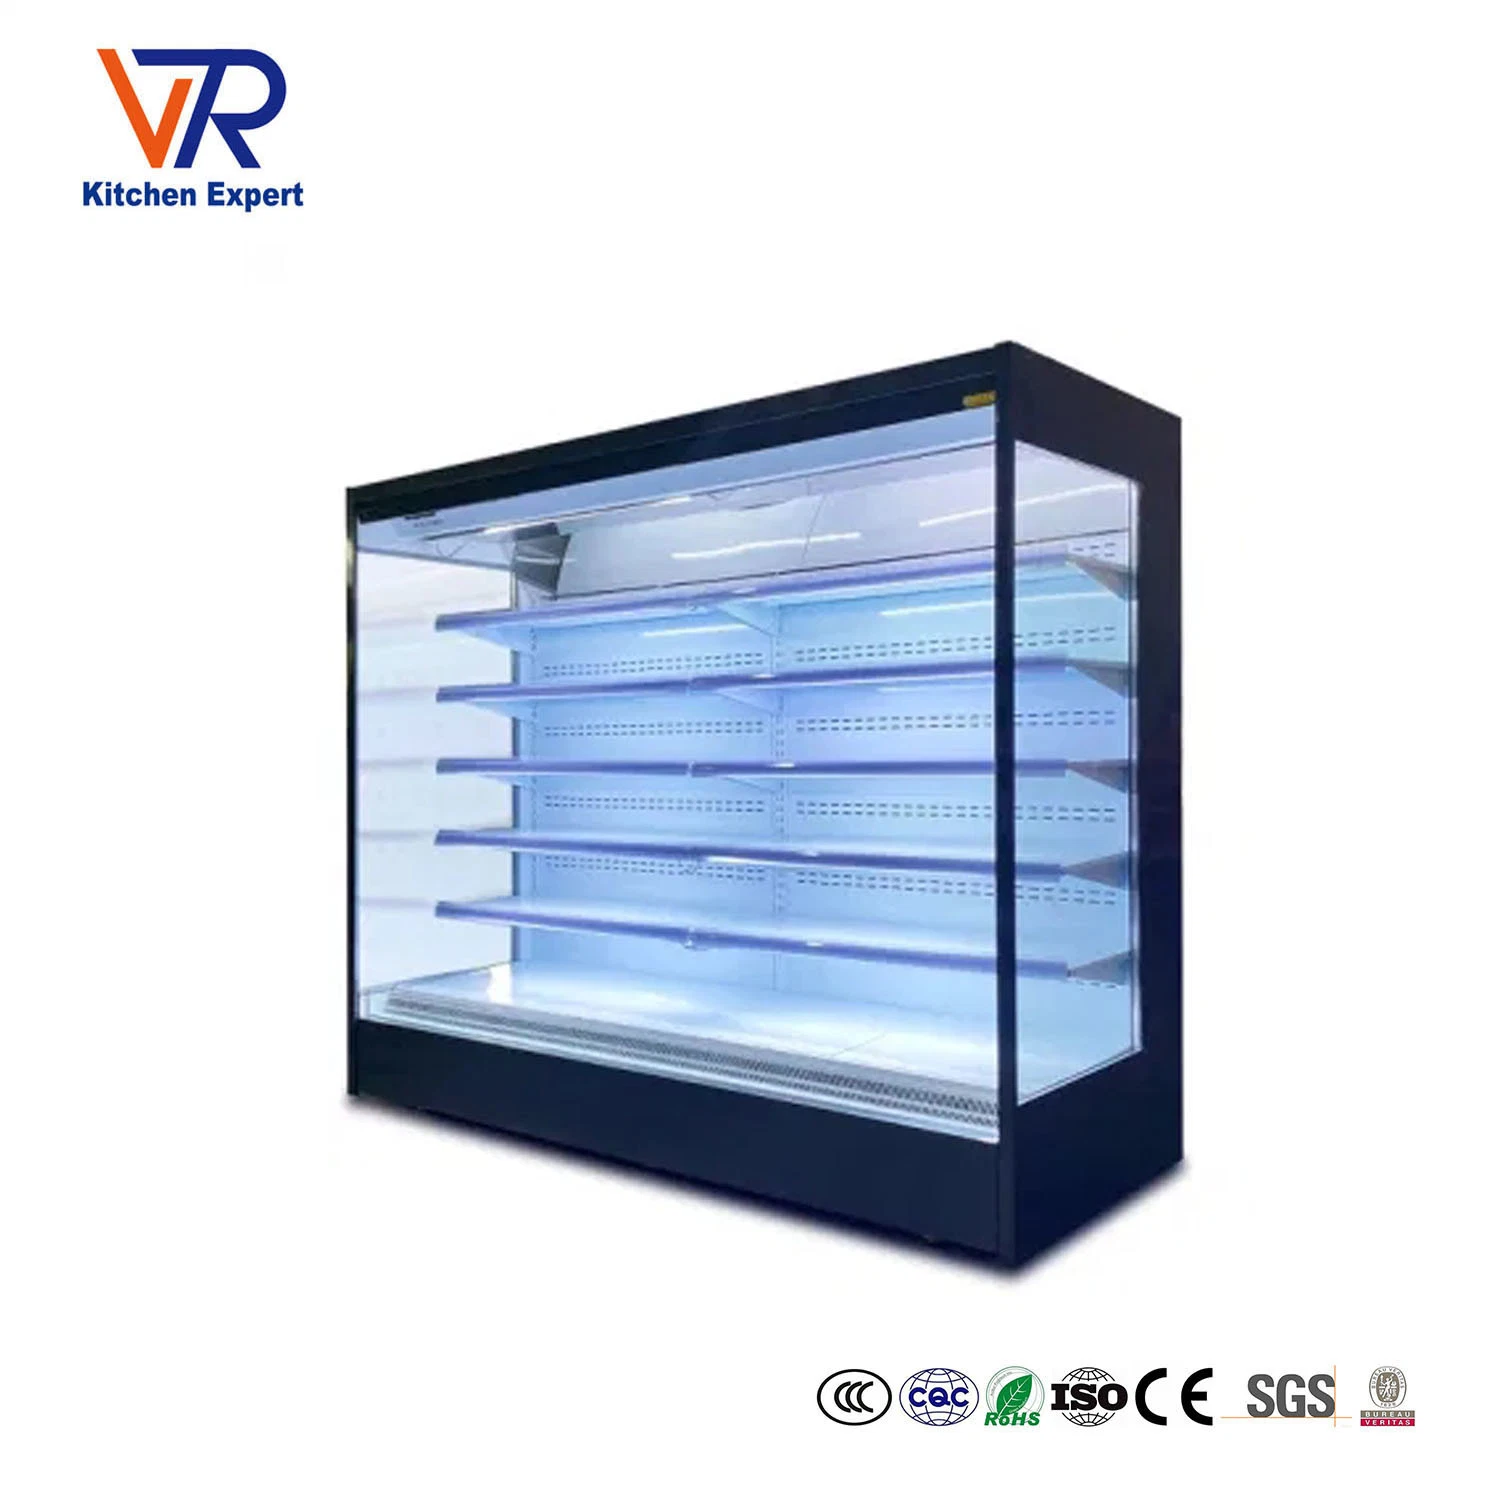 High quality/High cost performance  Fruits and Vegetables Display Refrigerato as Supermarket Refrigeration Equipment